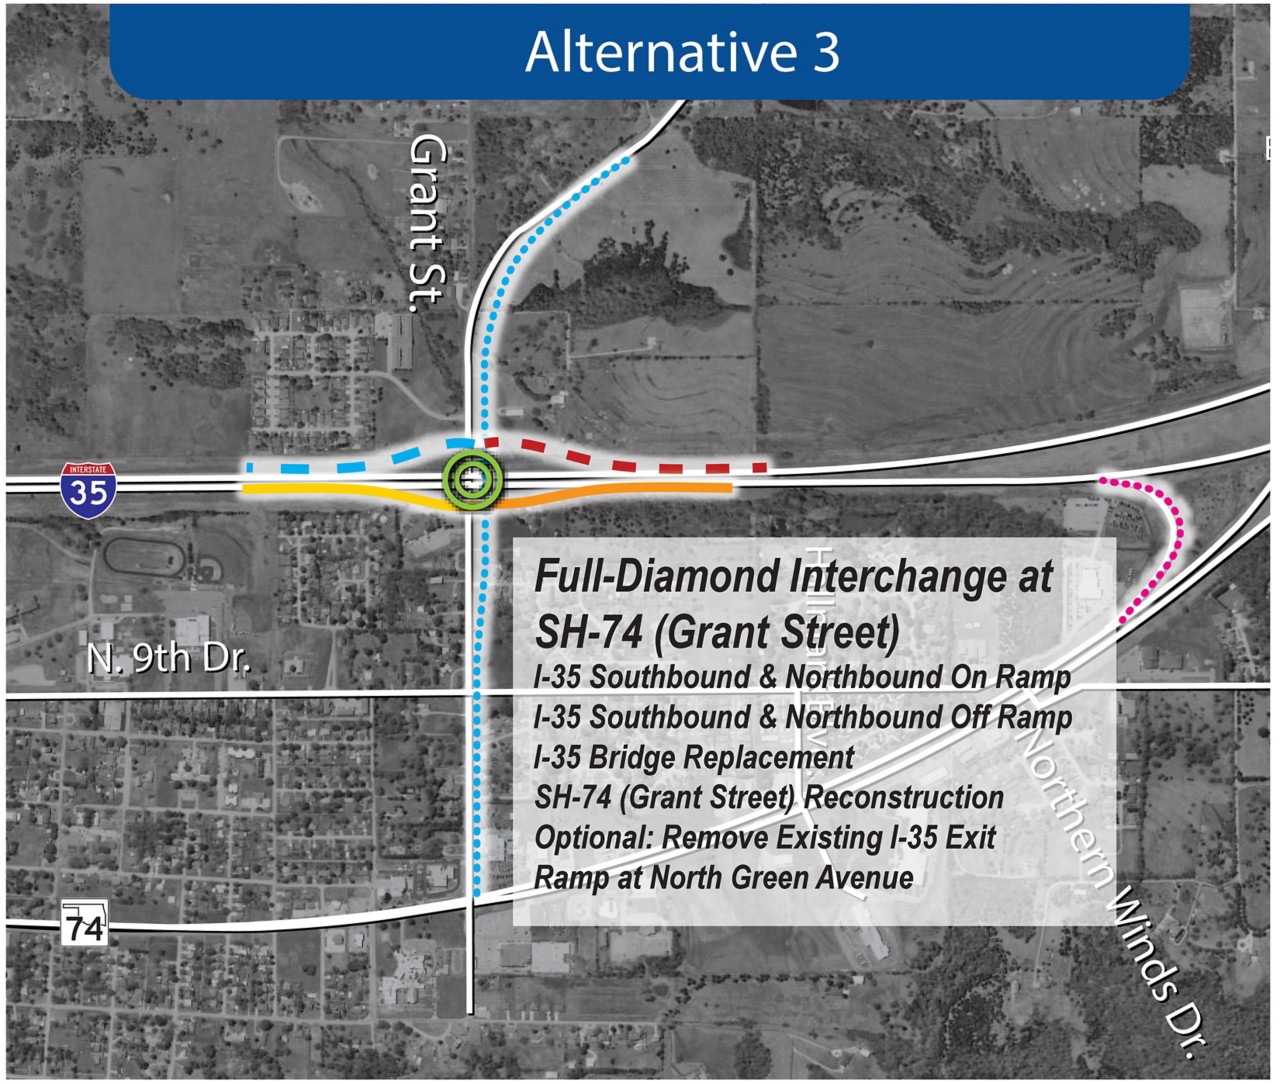 Rendering of the proposed I-35 interchange at SH-74/Grant St. in Purcell, showing north and southbound ramps